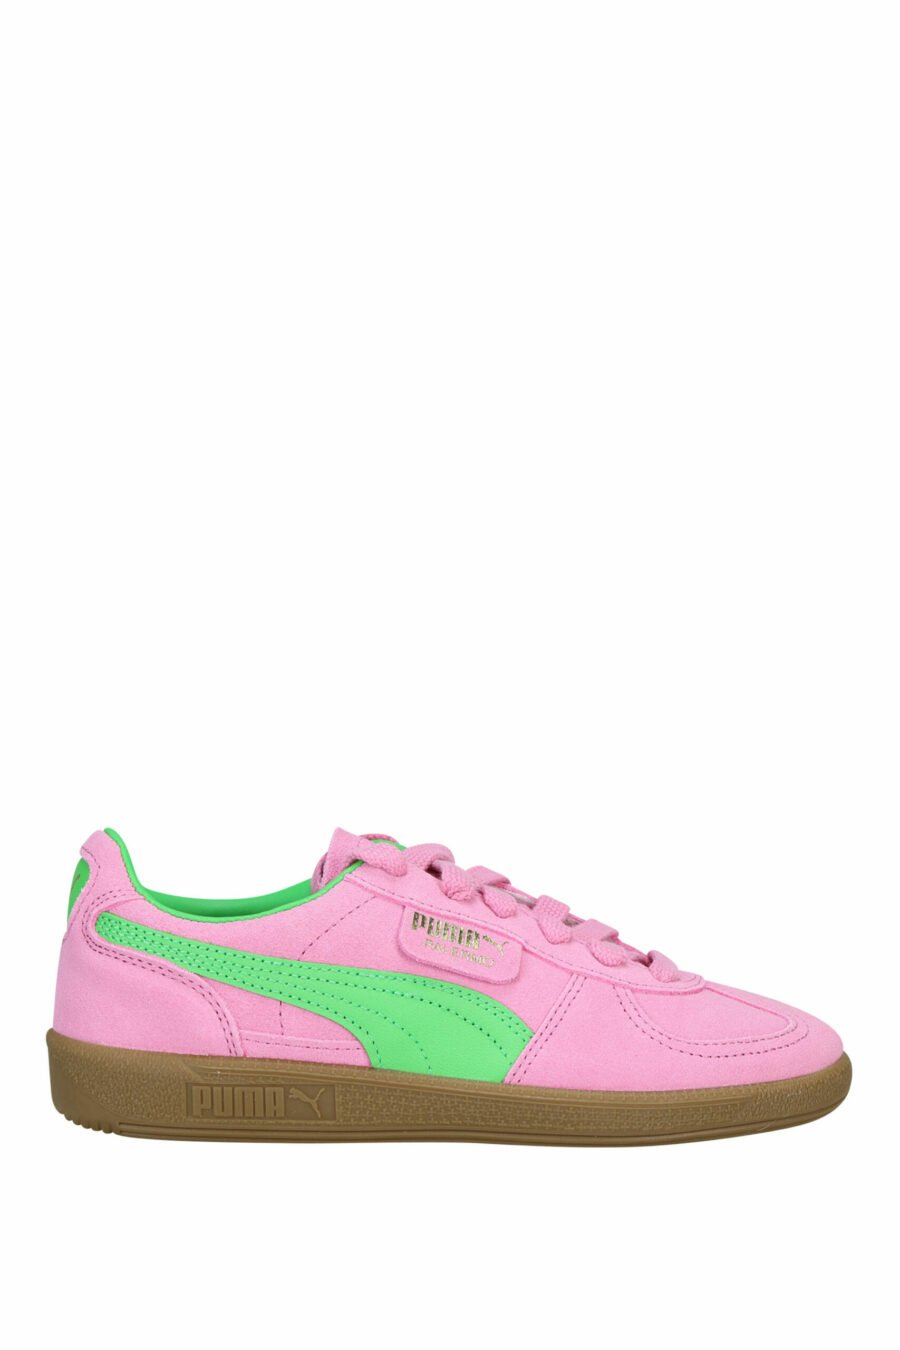 Trainers "palermo" fuchsia with green - 4099685699247 scaled